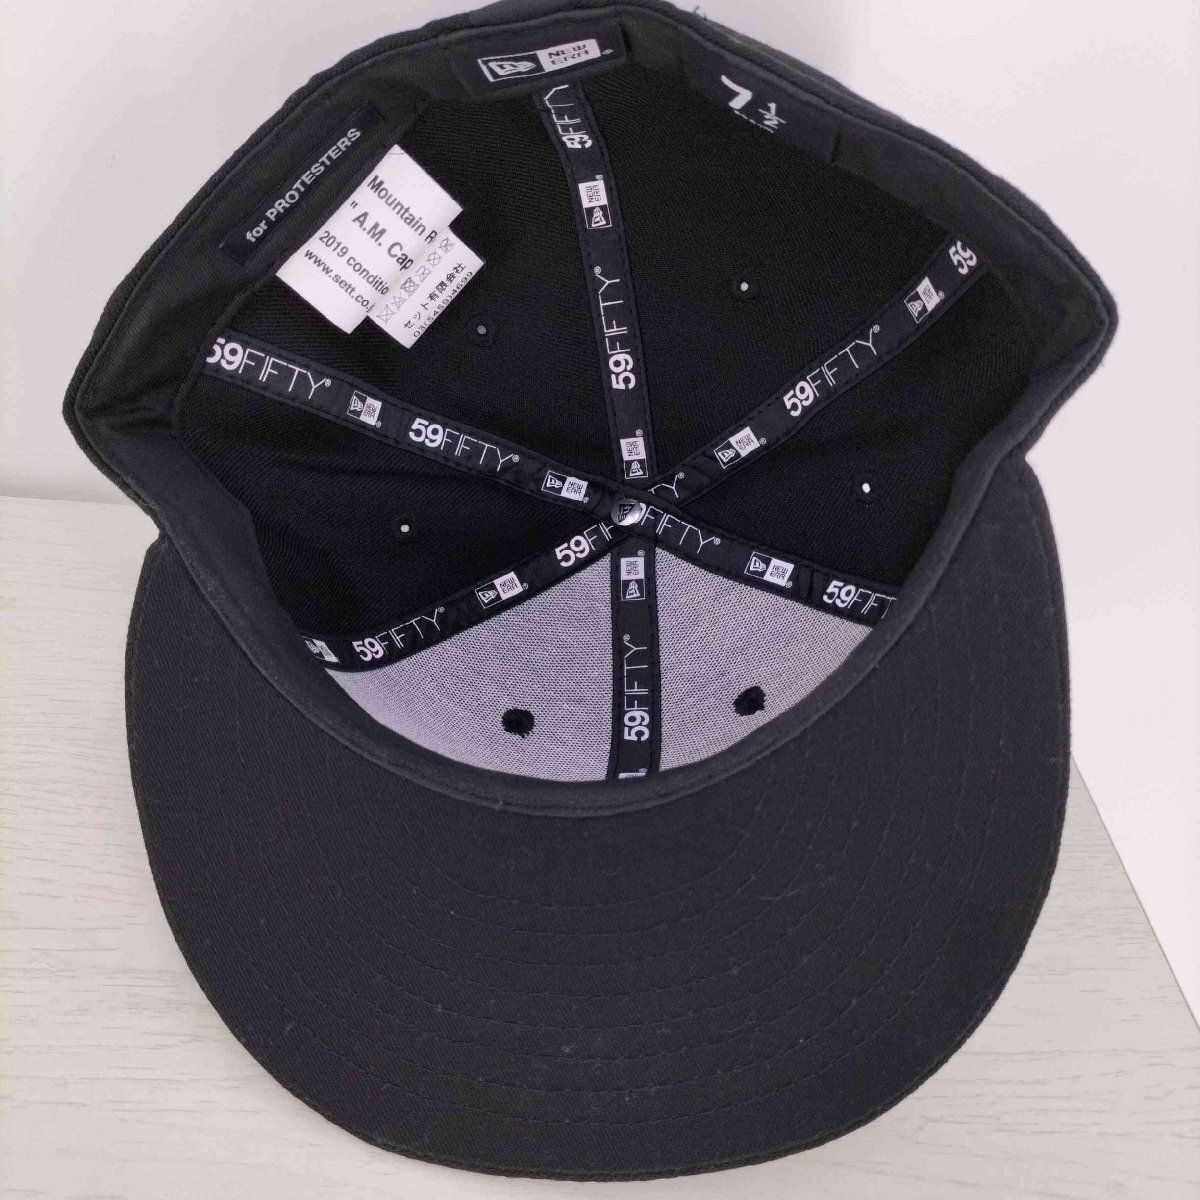 MOUNTAIN RESEARCH(マウンテンリサーチ) A.M. Cap 59FIFTY ロゴ刺繍 6パ 中古 古着 0305_画像5